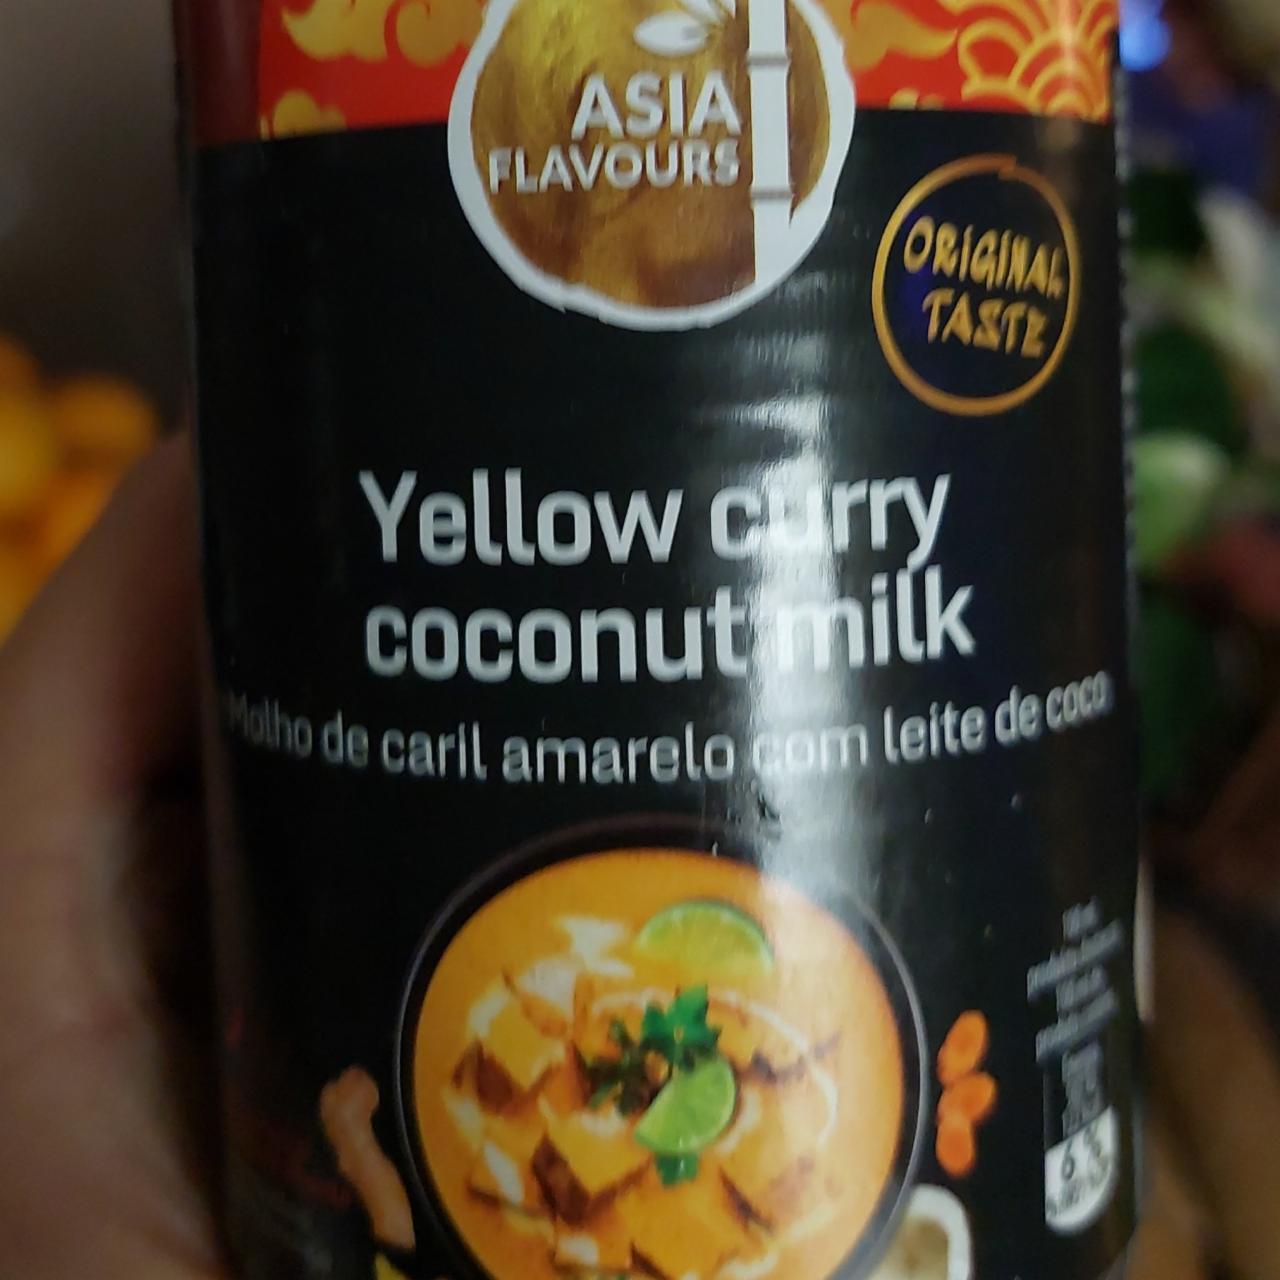 Fotografie - Yellow curry coconut milk Asia Flavours